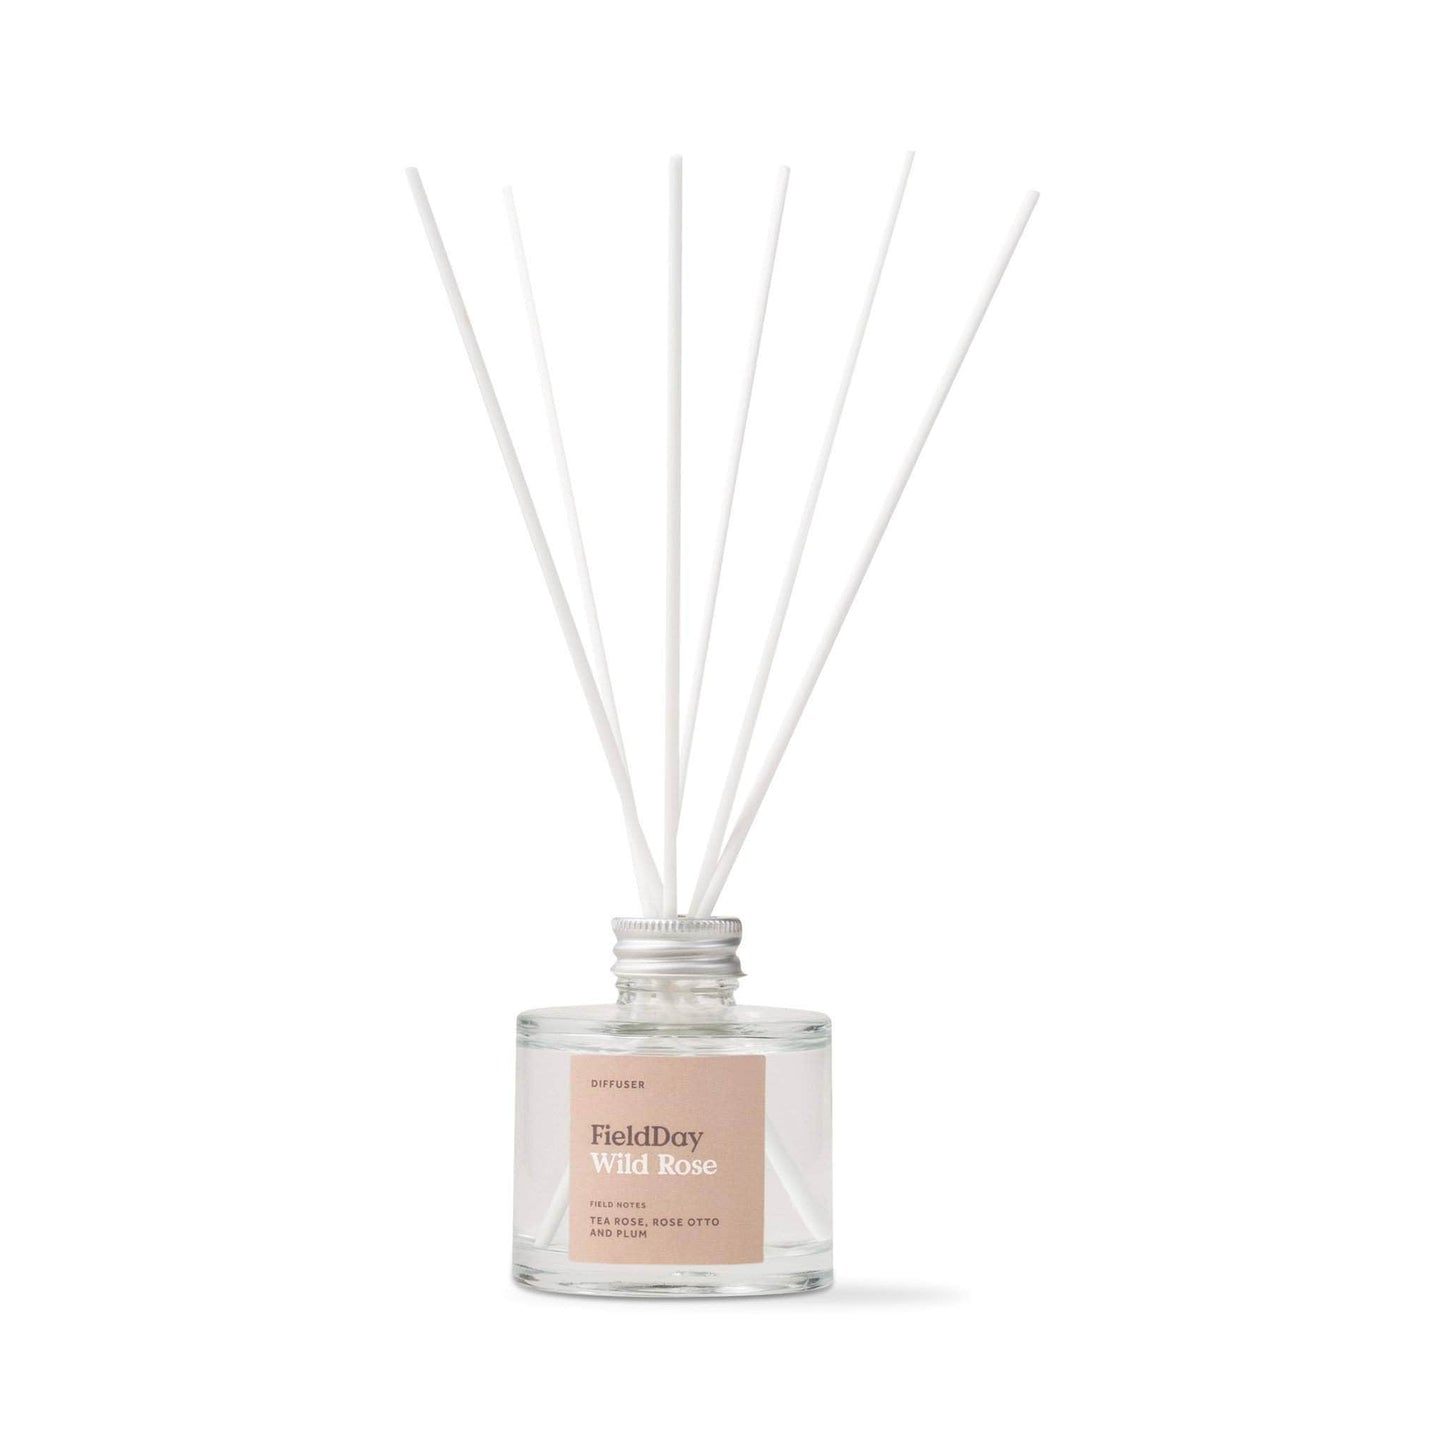 FieldDay Home Fragrance FieldDay Classic Collection Diffuser 100ml - Wild Rose